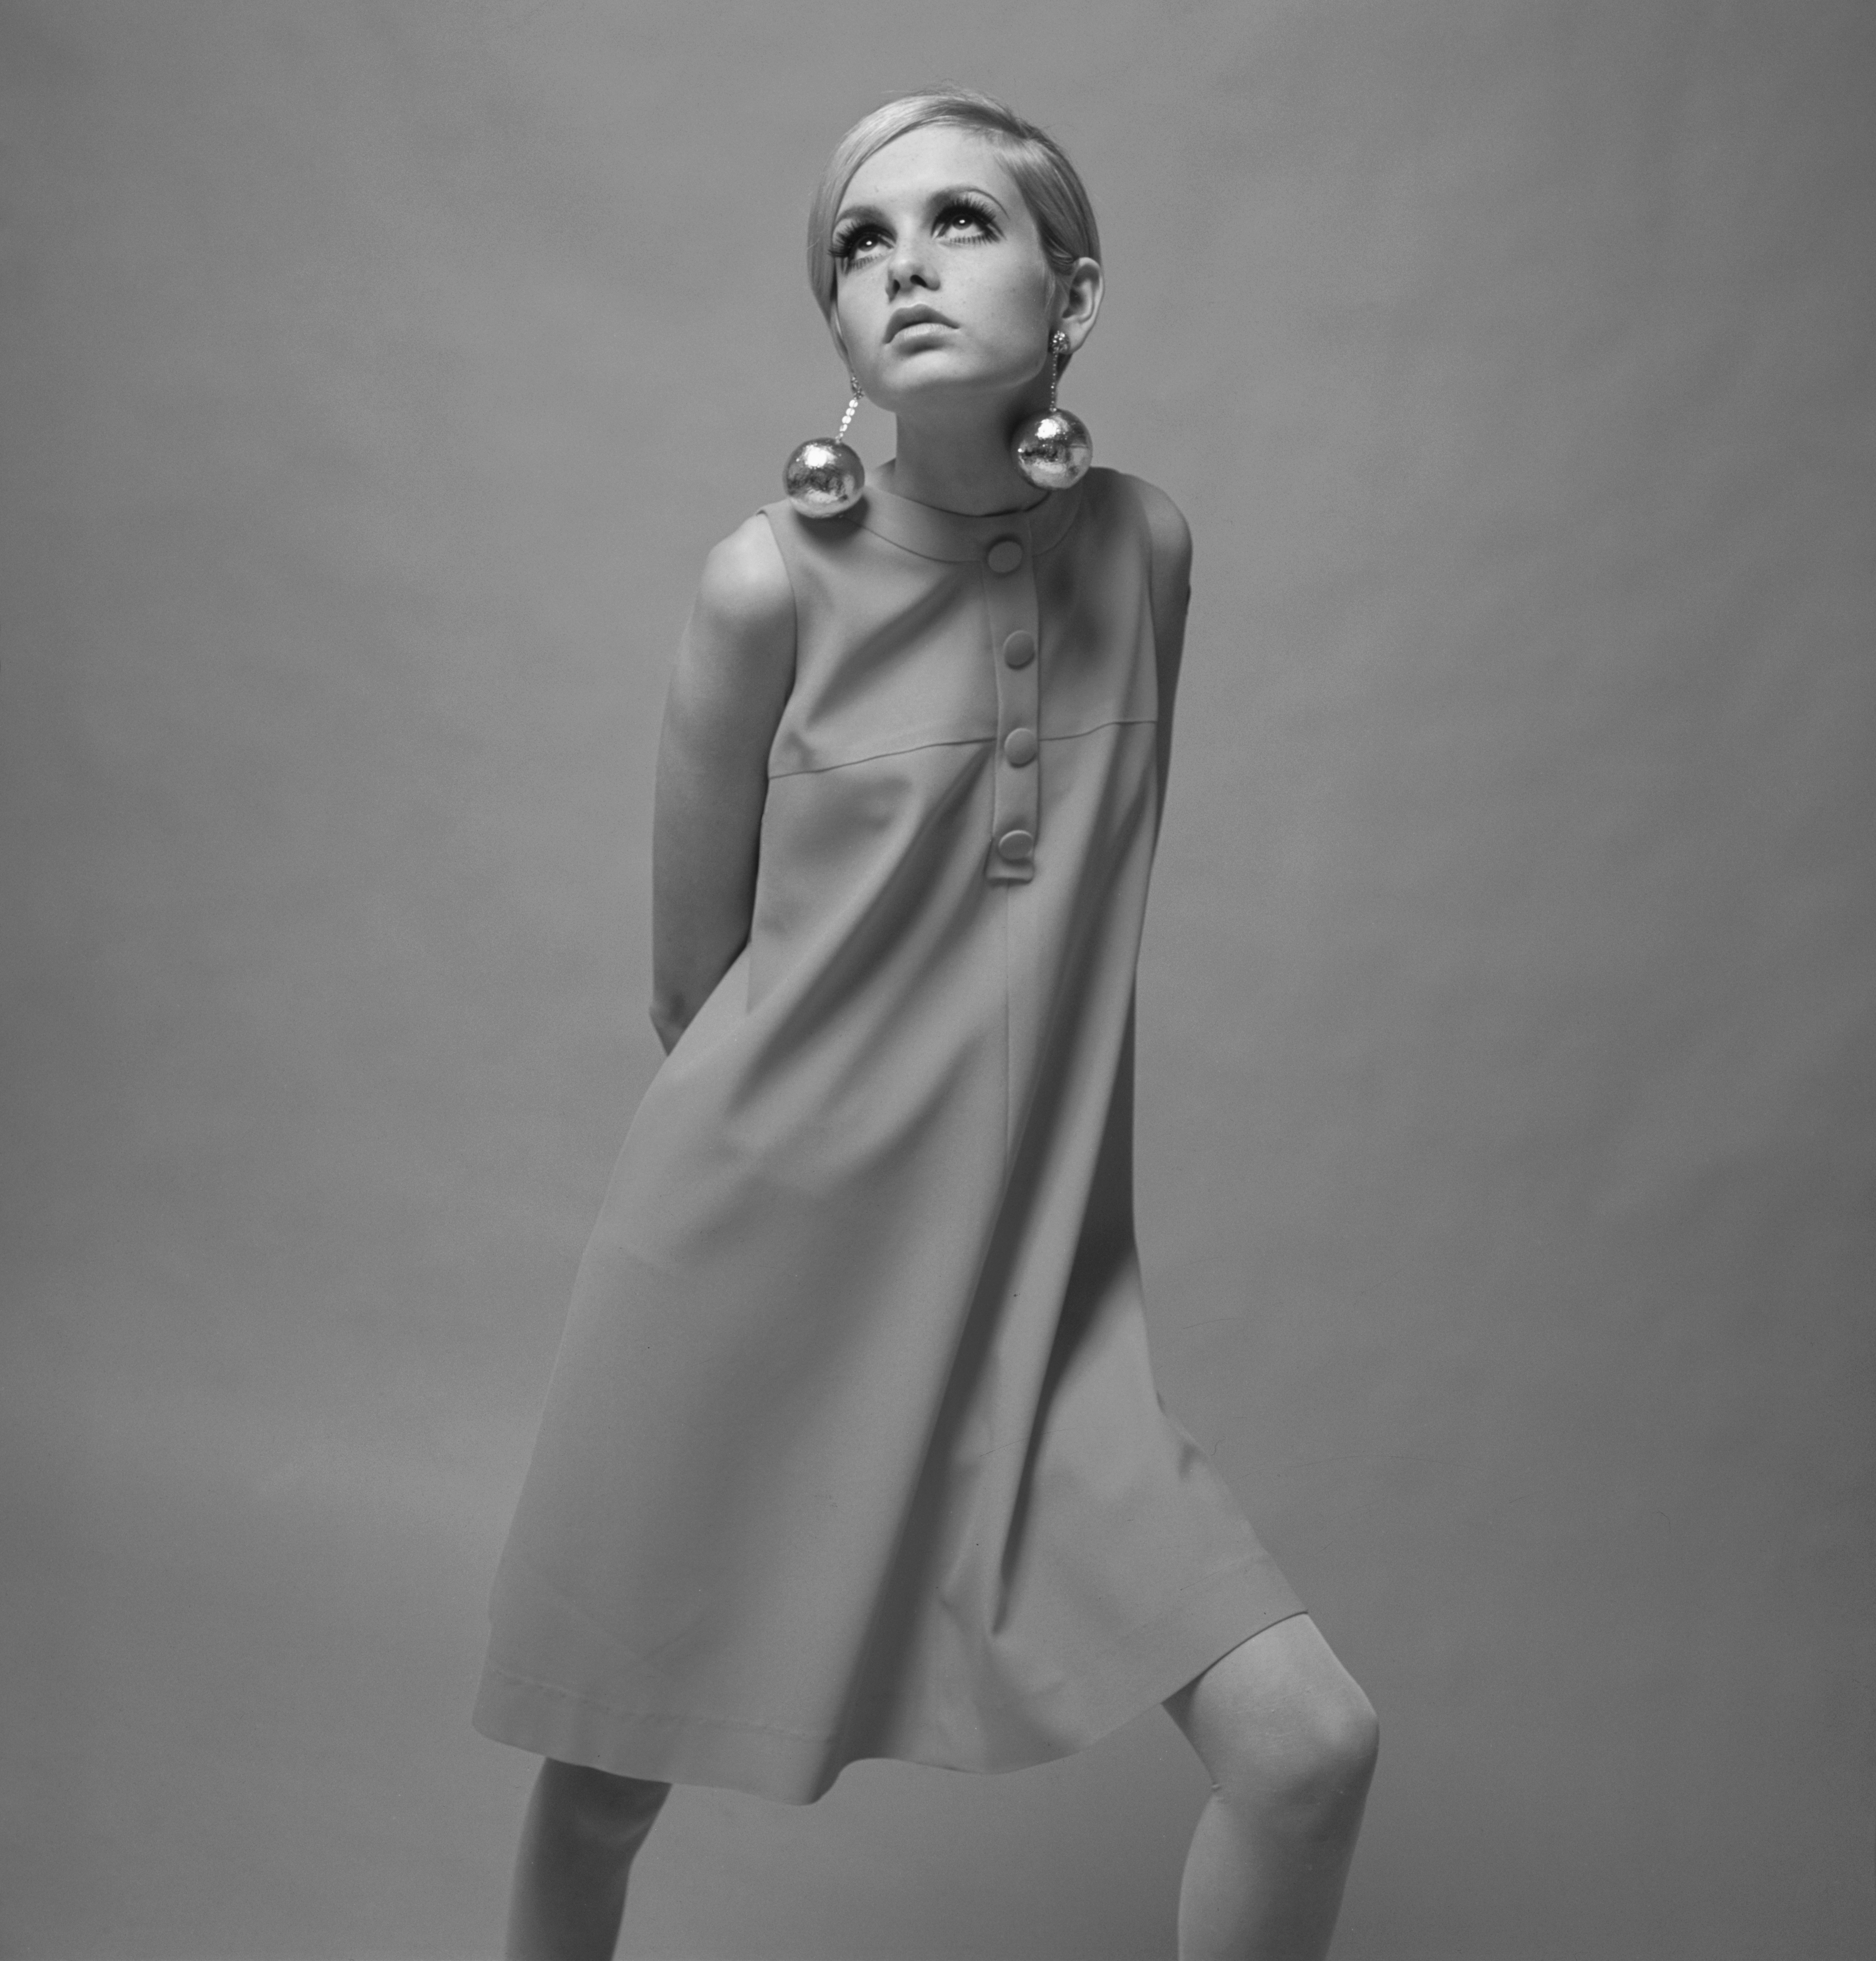 Twiggy pictures of 